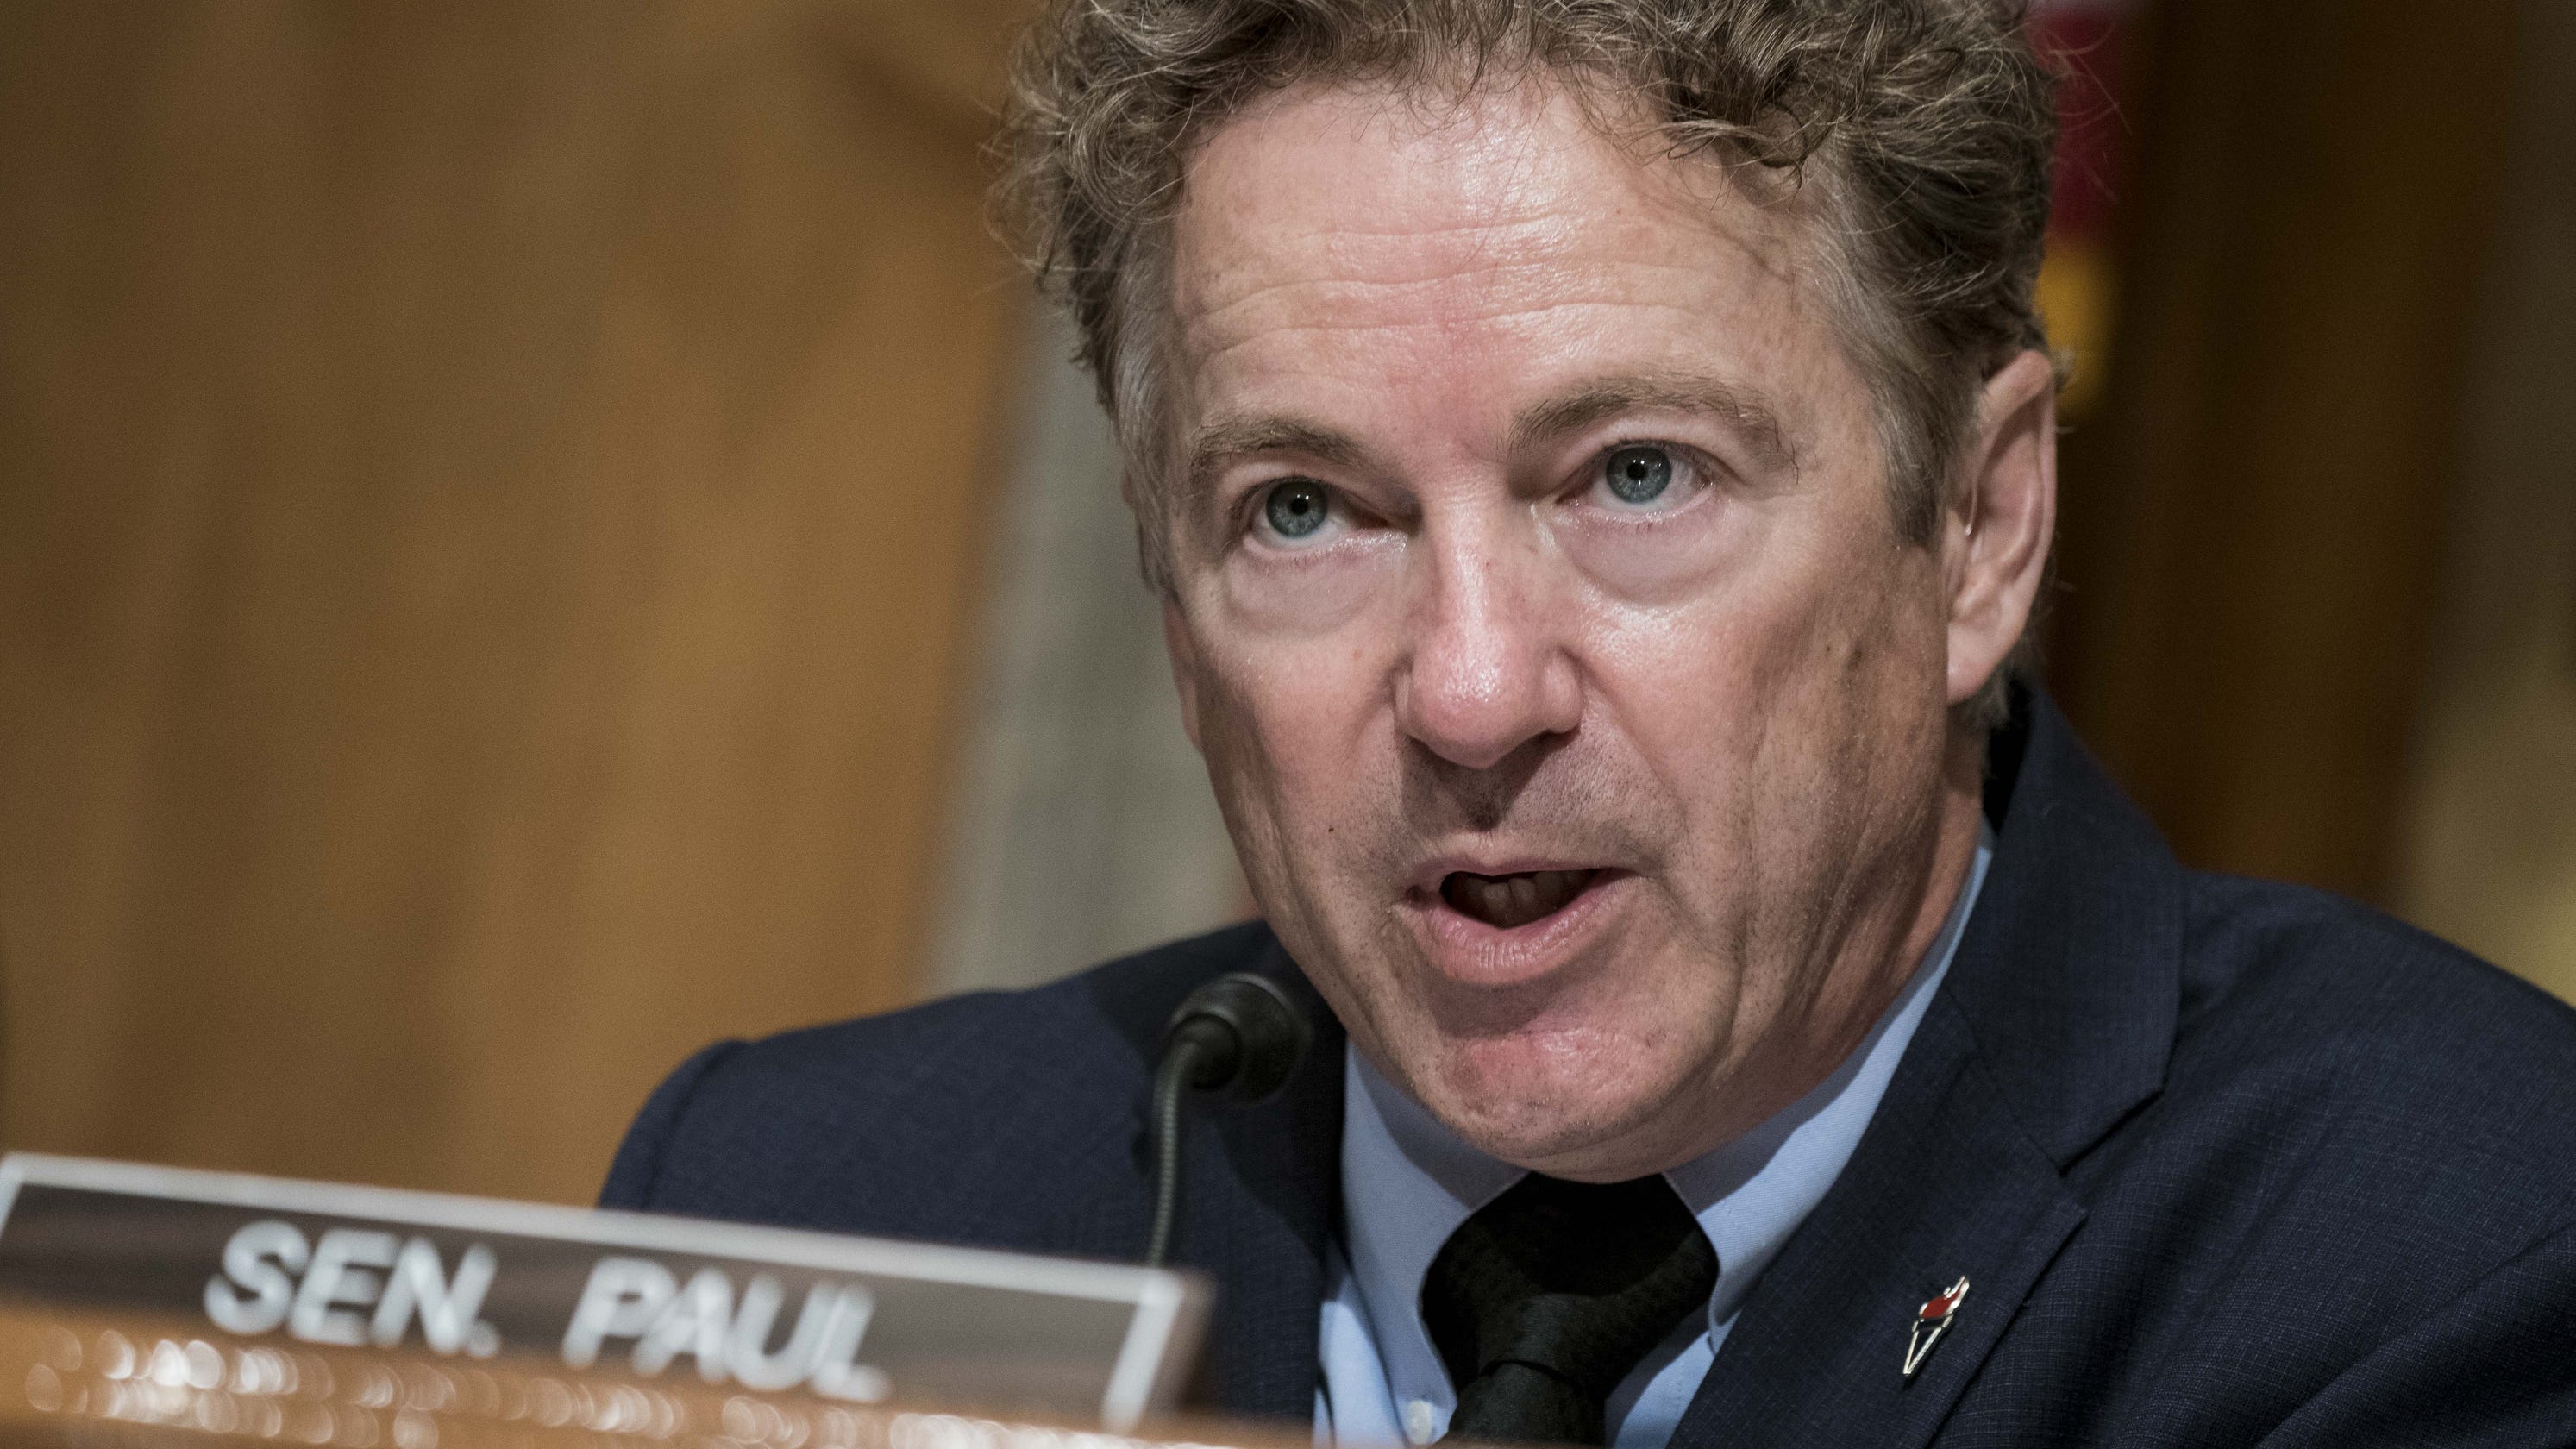 Sen. Rand Paul: Why I didn’t quarantine after getting tested